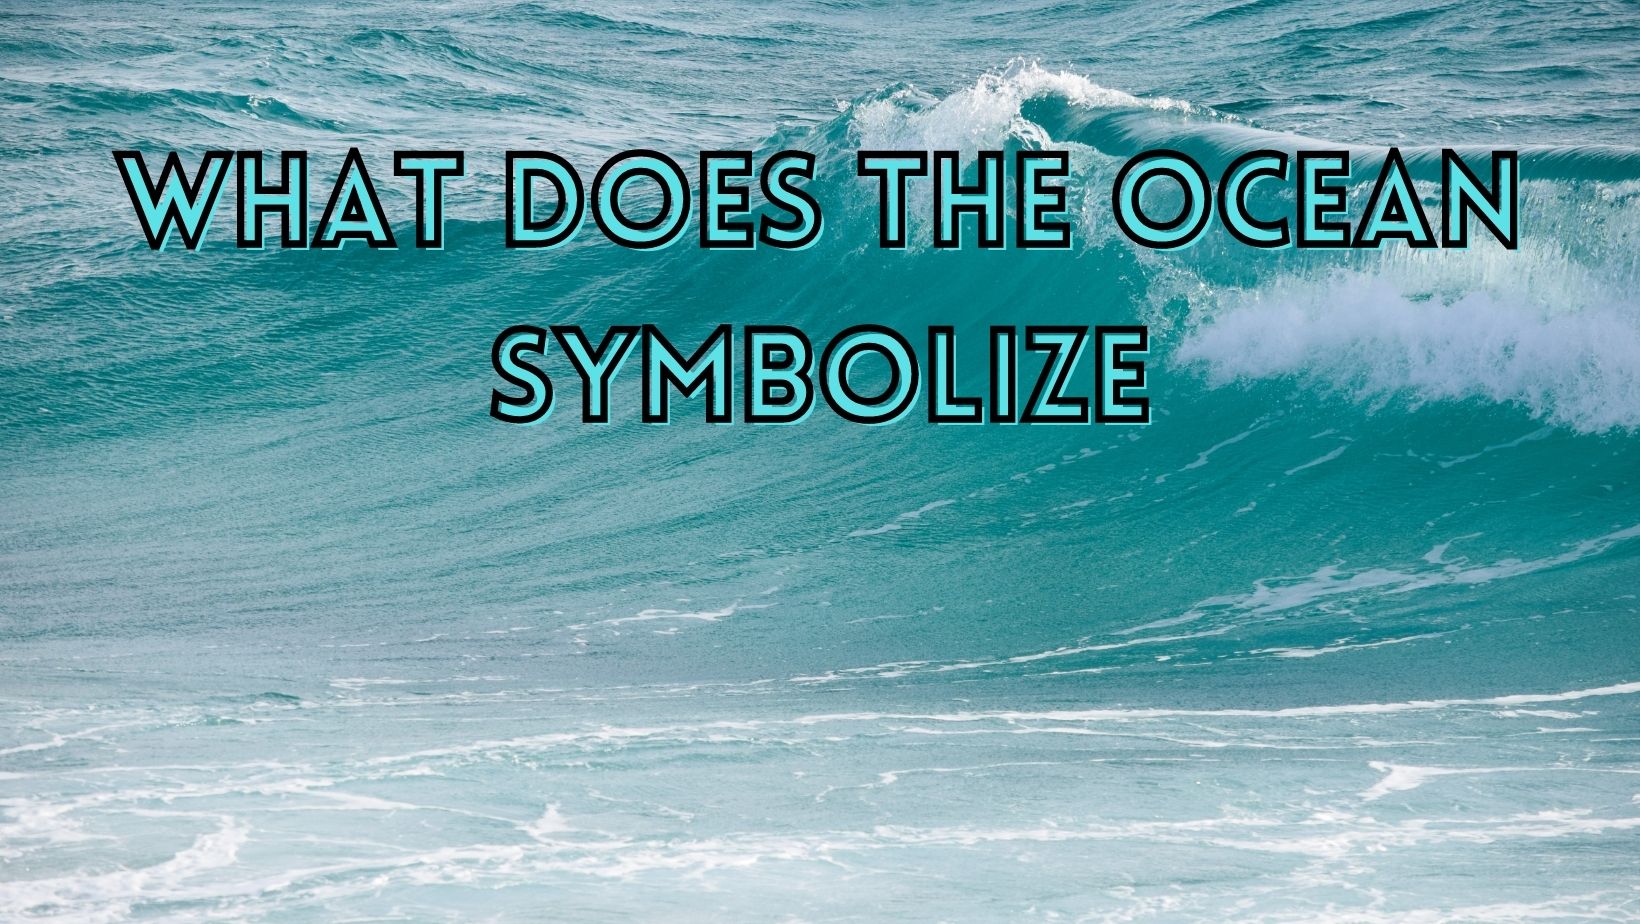 What does ocean symbolizes